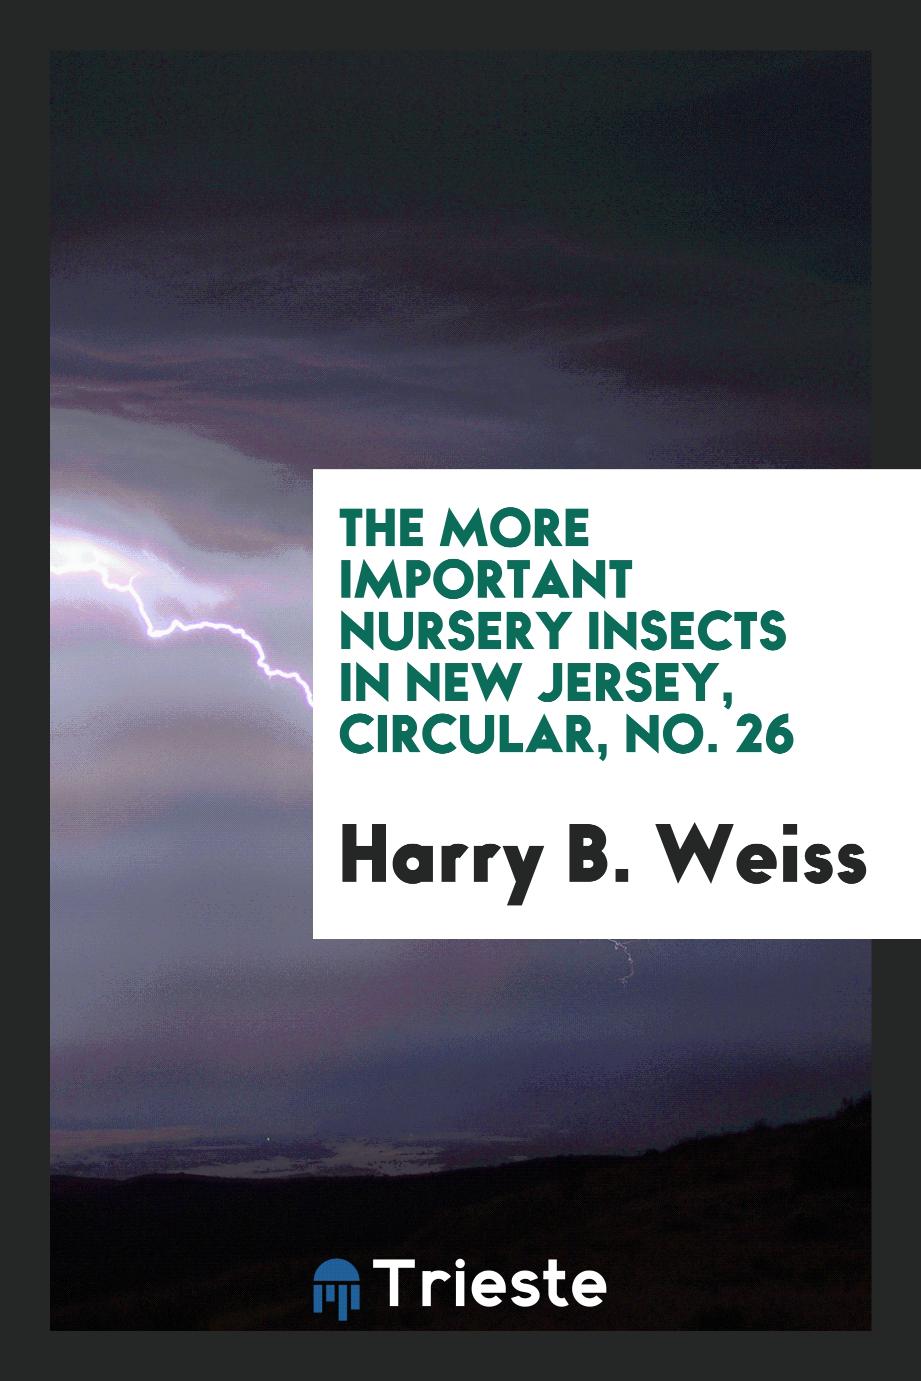 The more important nursery insects in New Jersey, Circular, No. 26